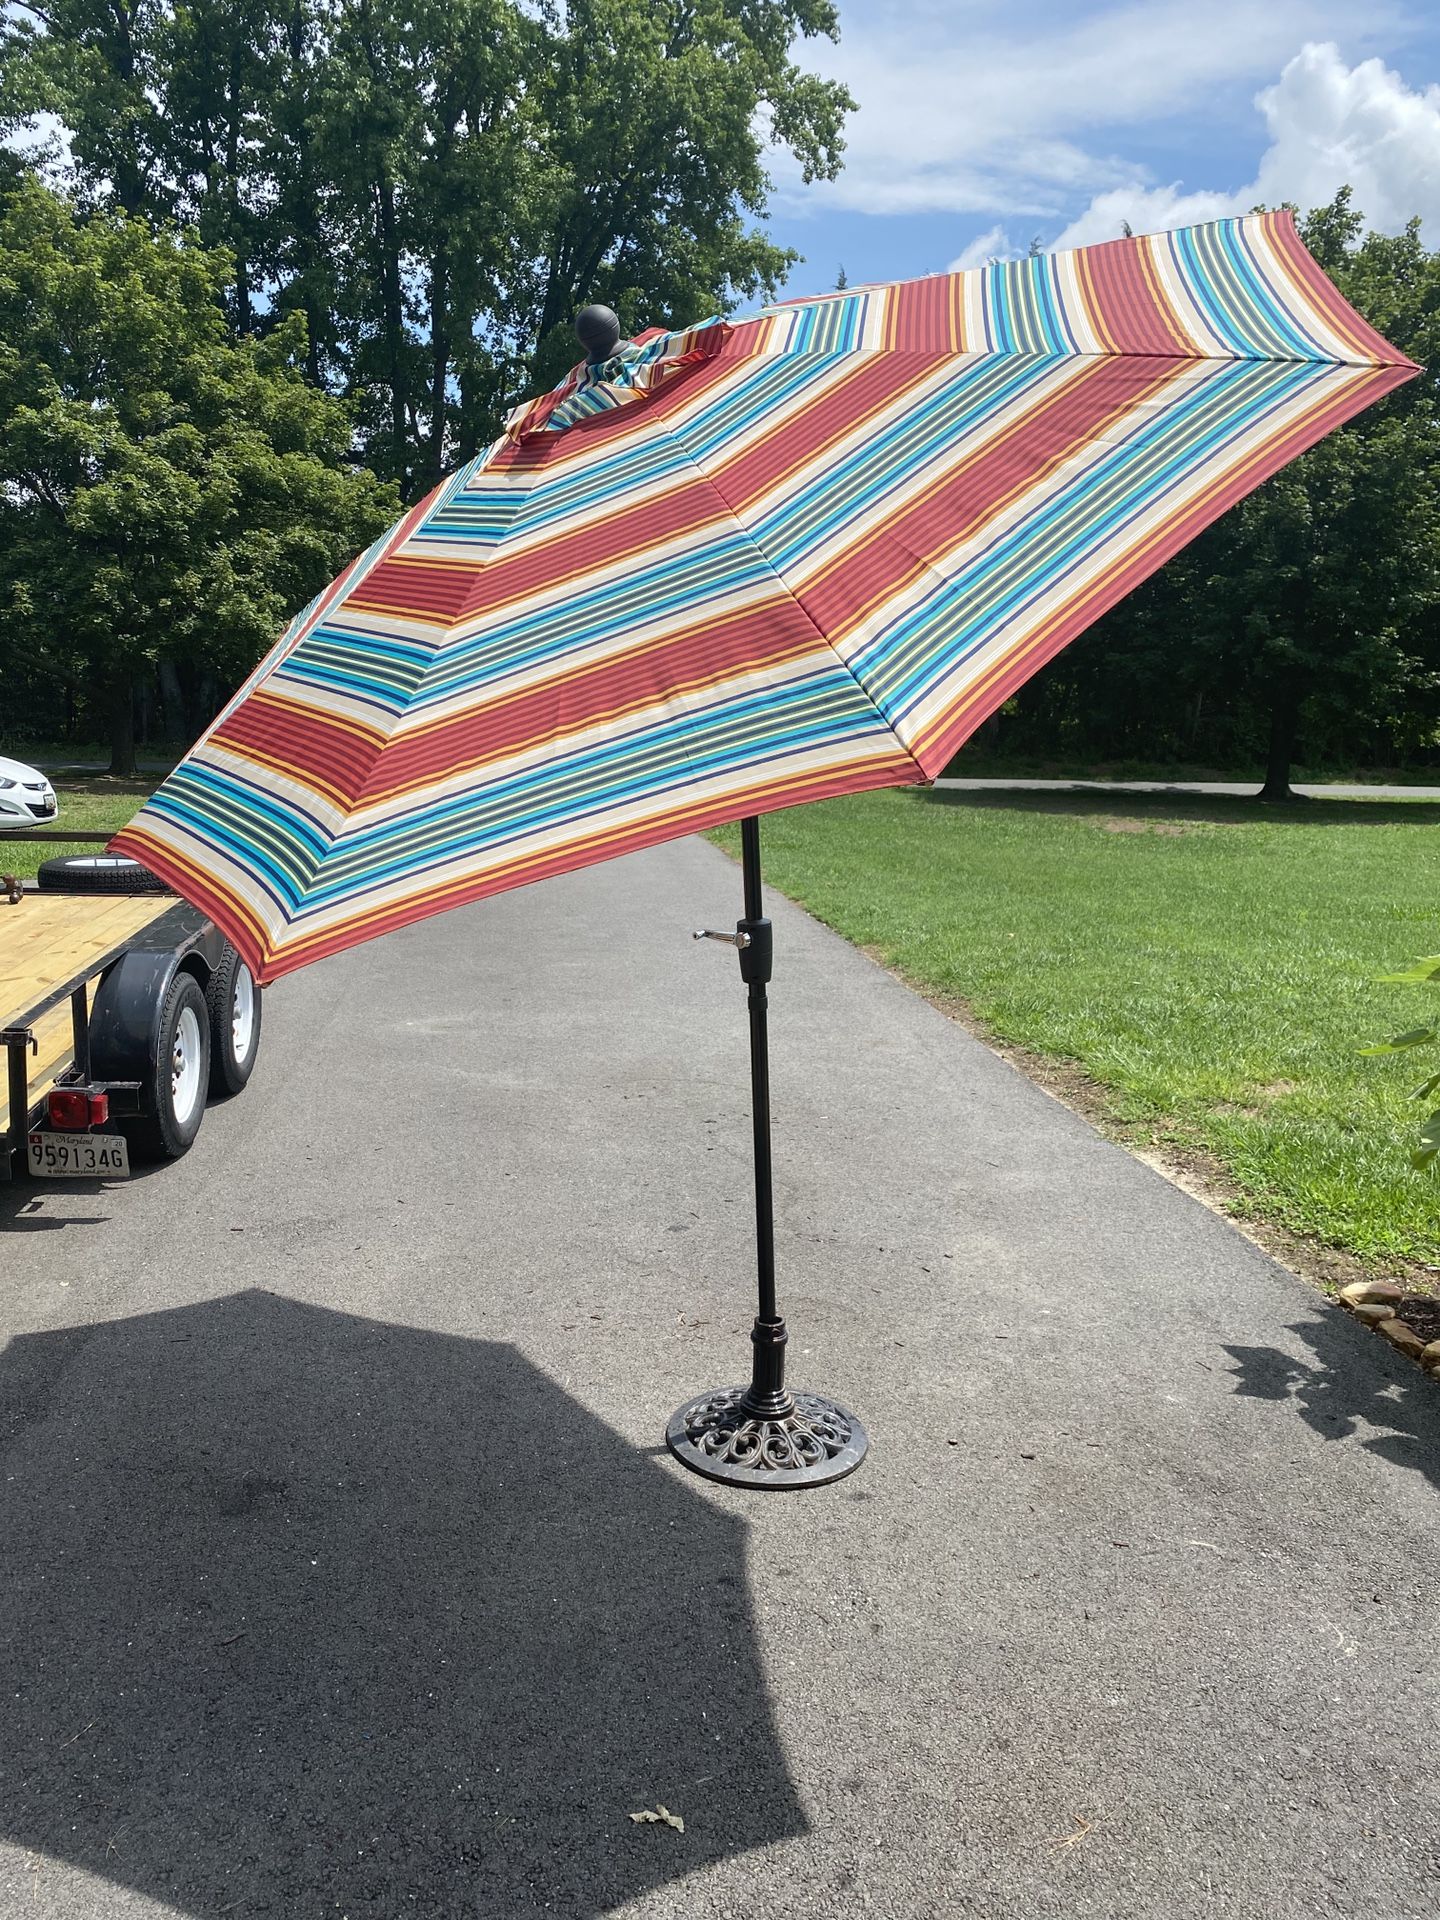 Bed Bath and Beyond 9 ft patio umbrellas